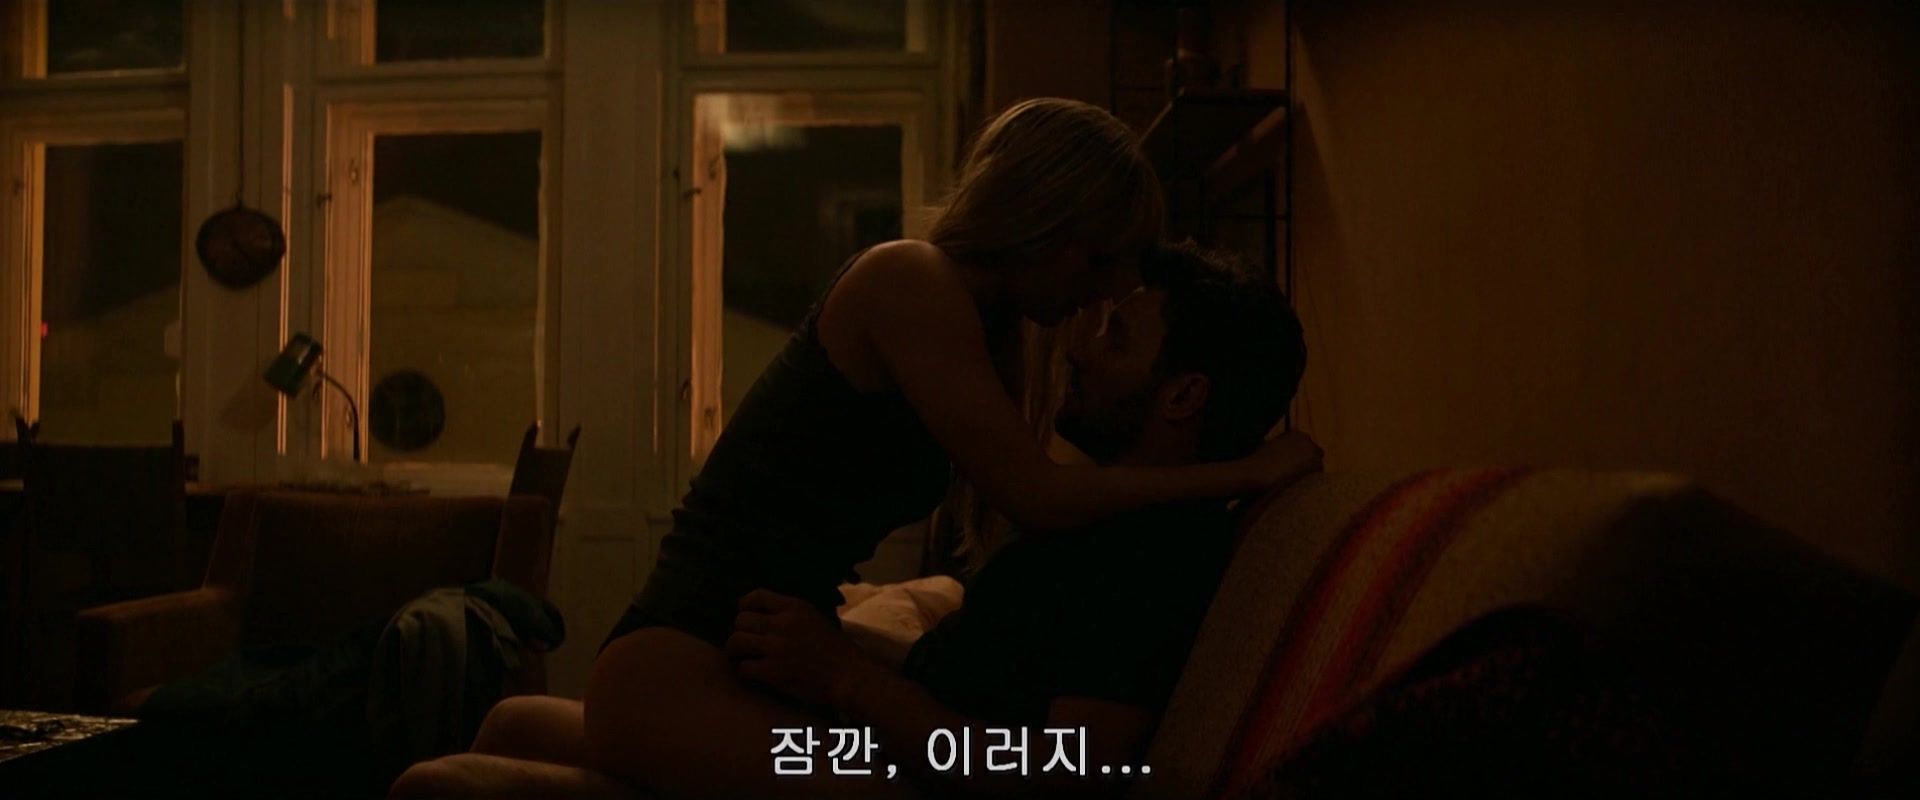 Free Rough Porn Jennifer Lawrence nude - Red Sparrow (2018) Full HD Stunning - 1